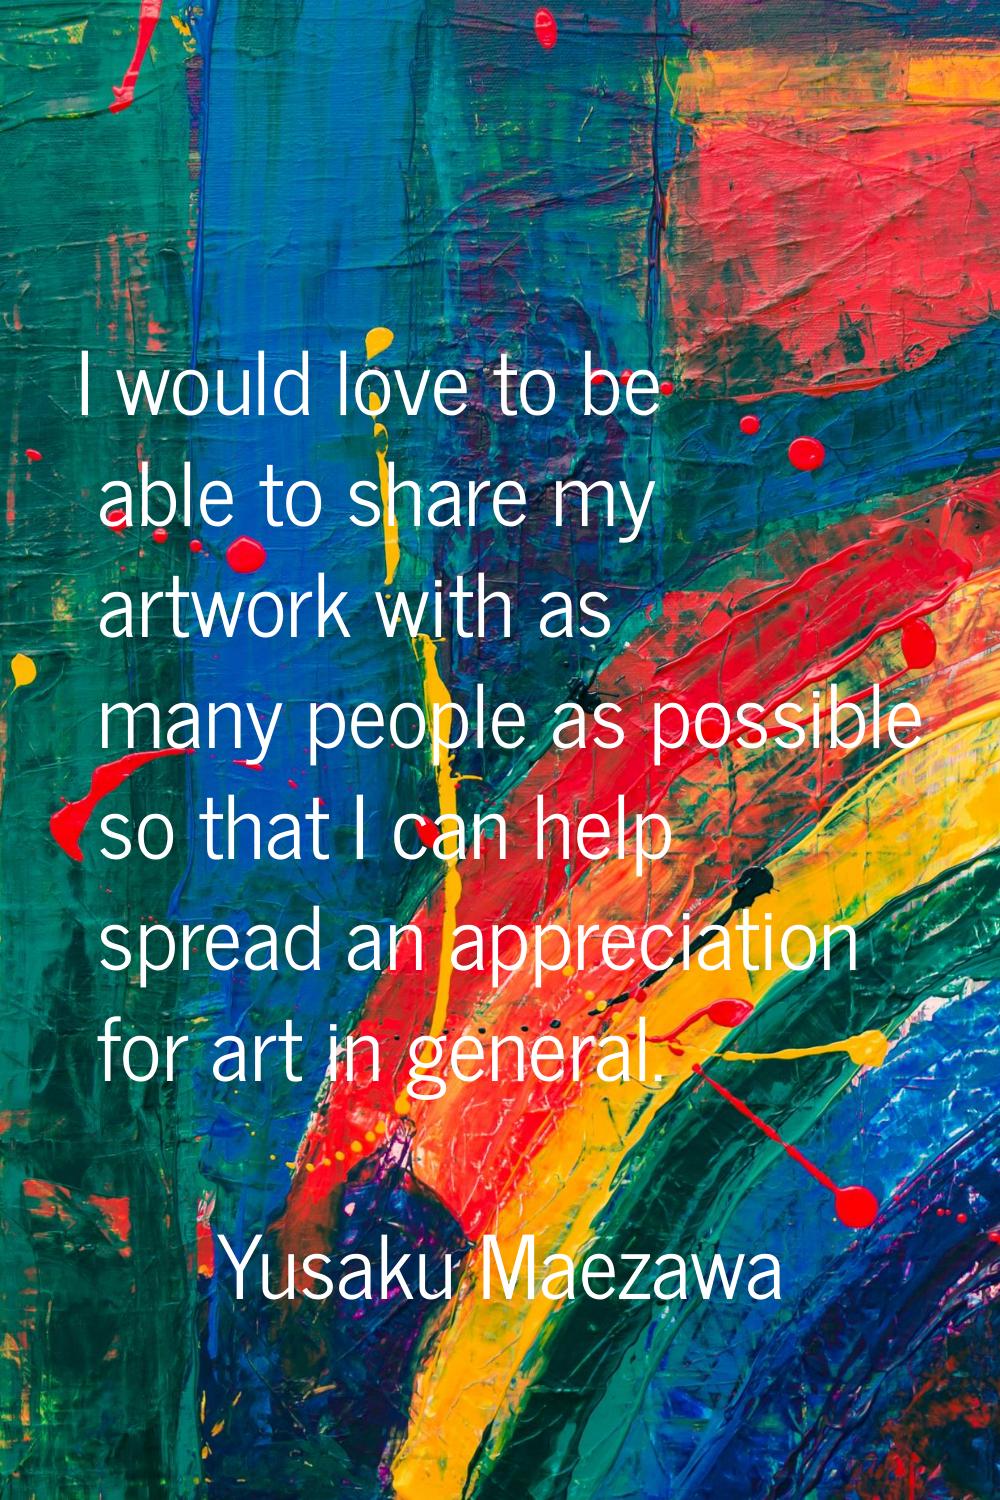 I would love to be able to share my artwork with as many people as possible so that I can help spre